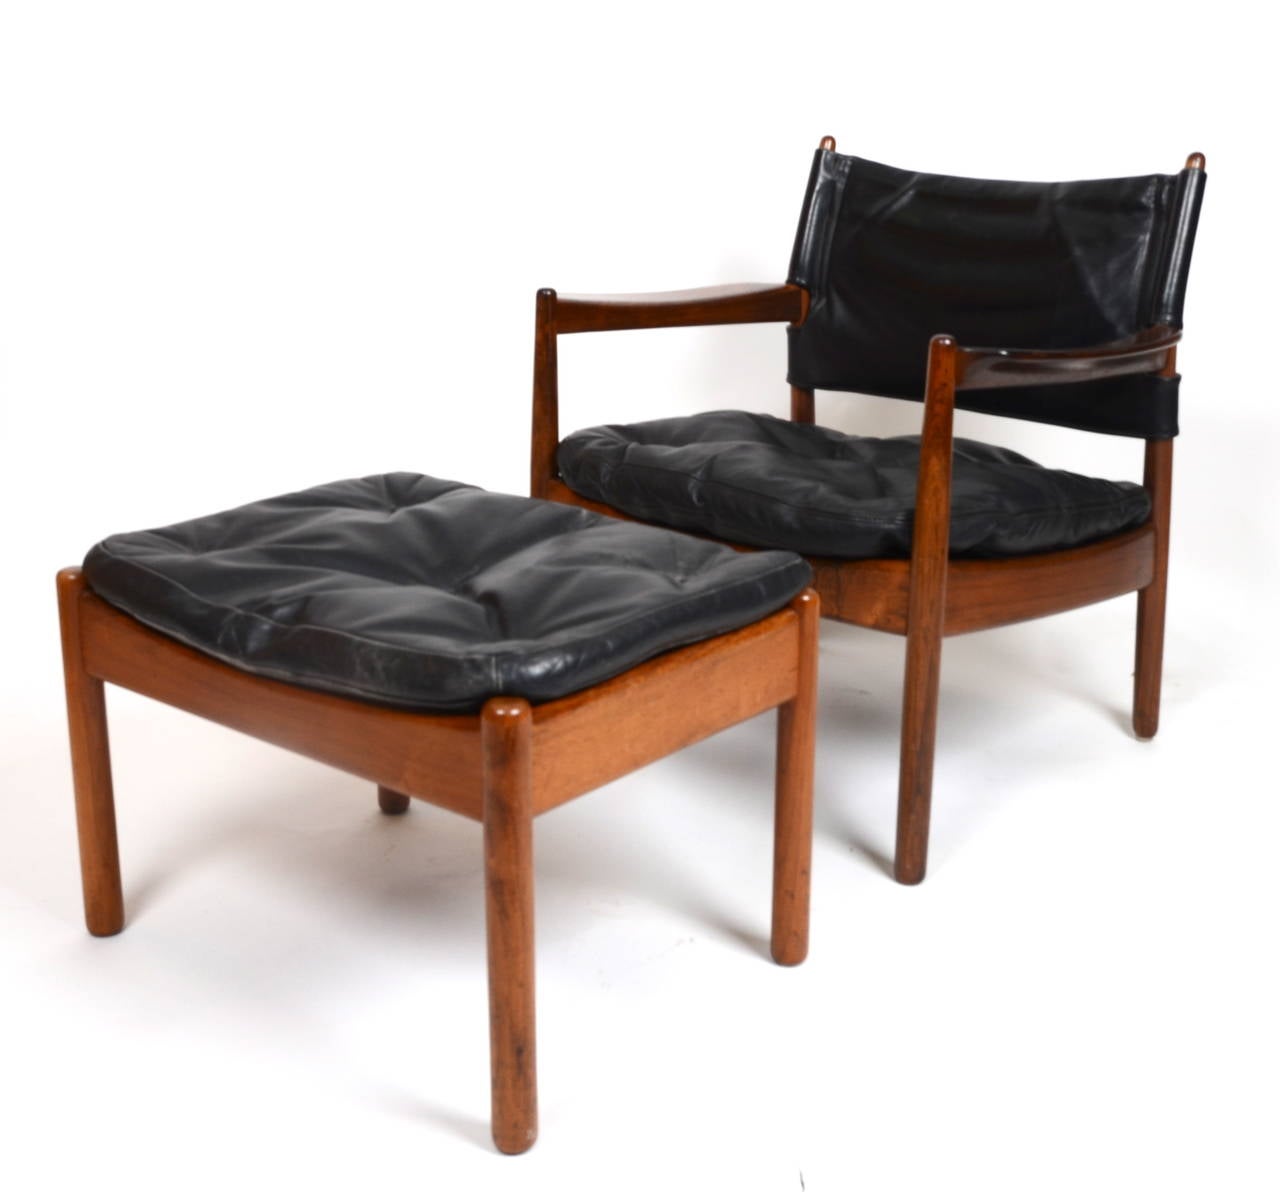 Armchair and stool in wood and leather. Designed by Gunnar Myrstrand for Källemo. Sweden, 1960´s.